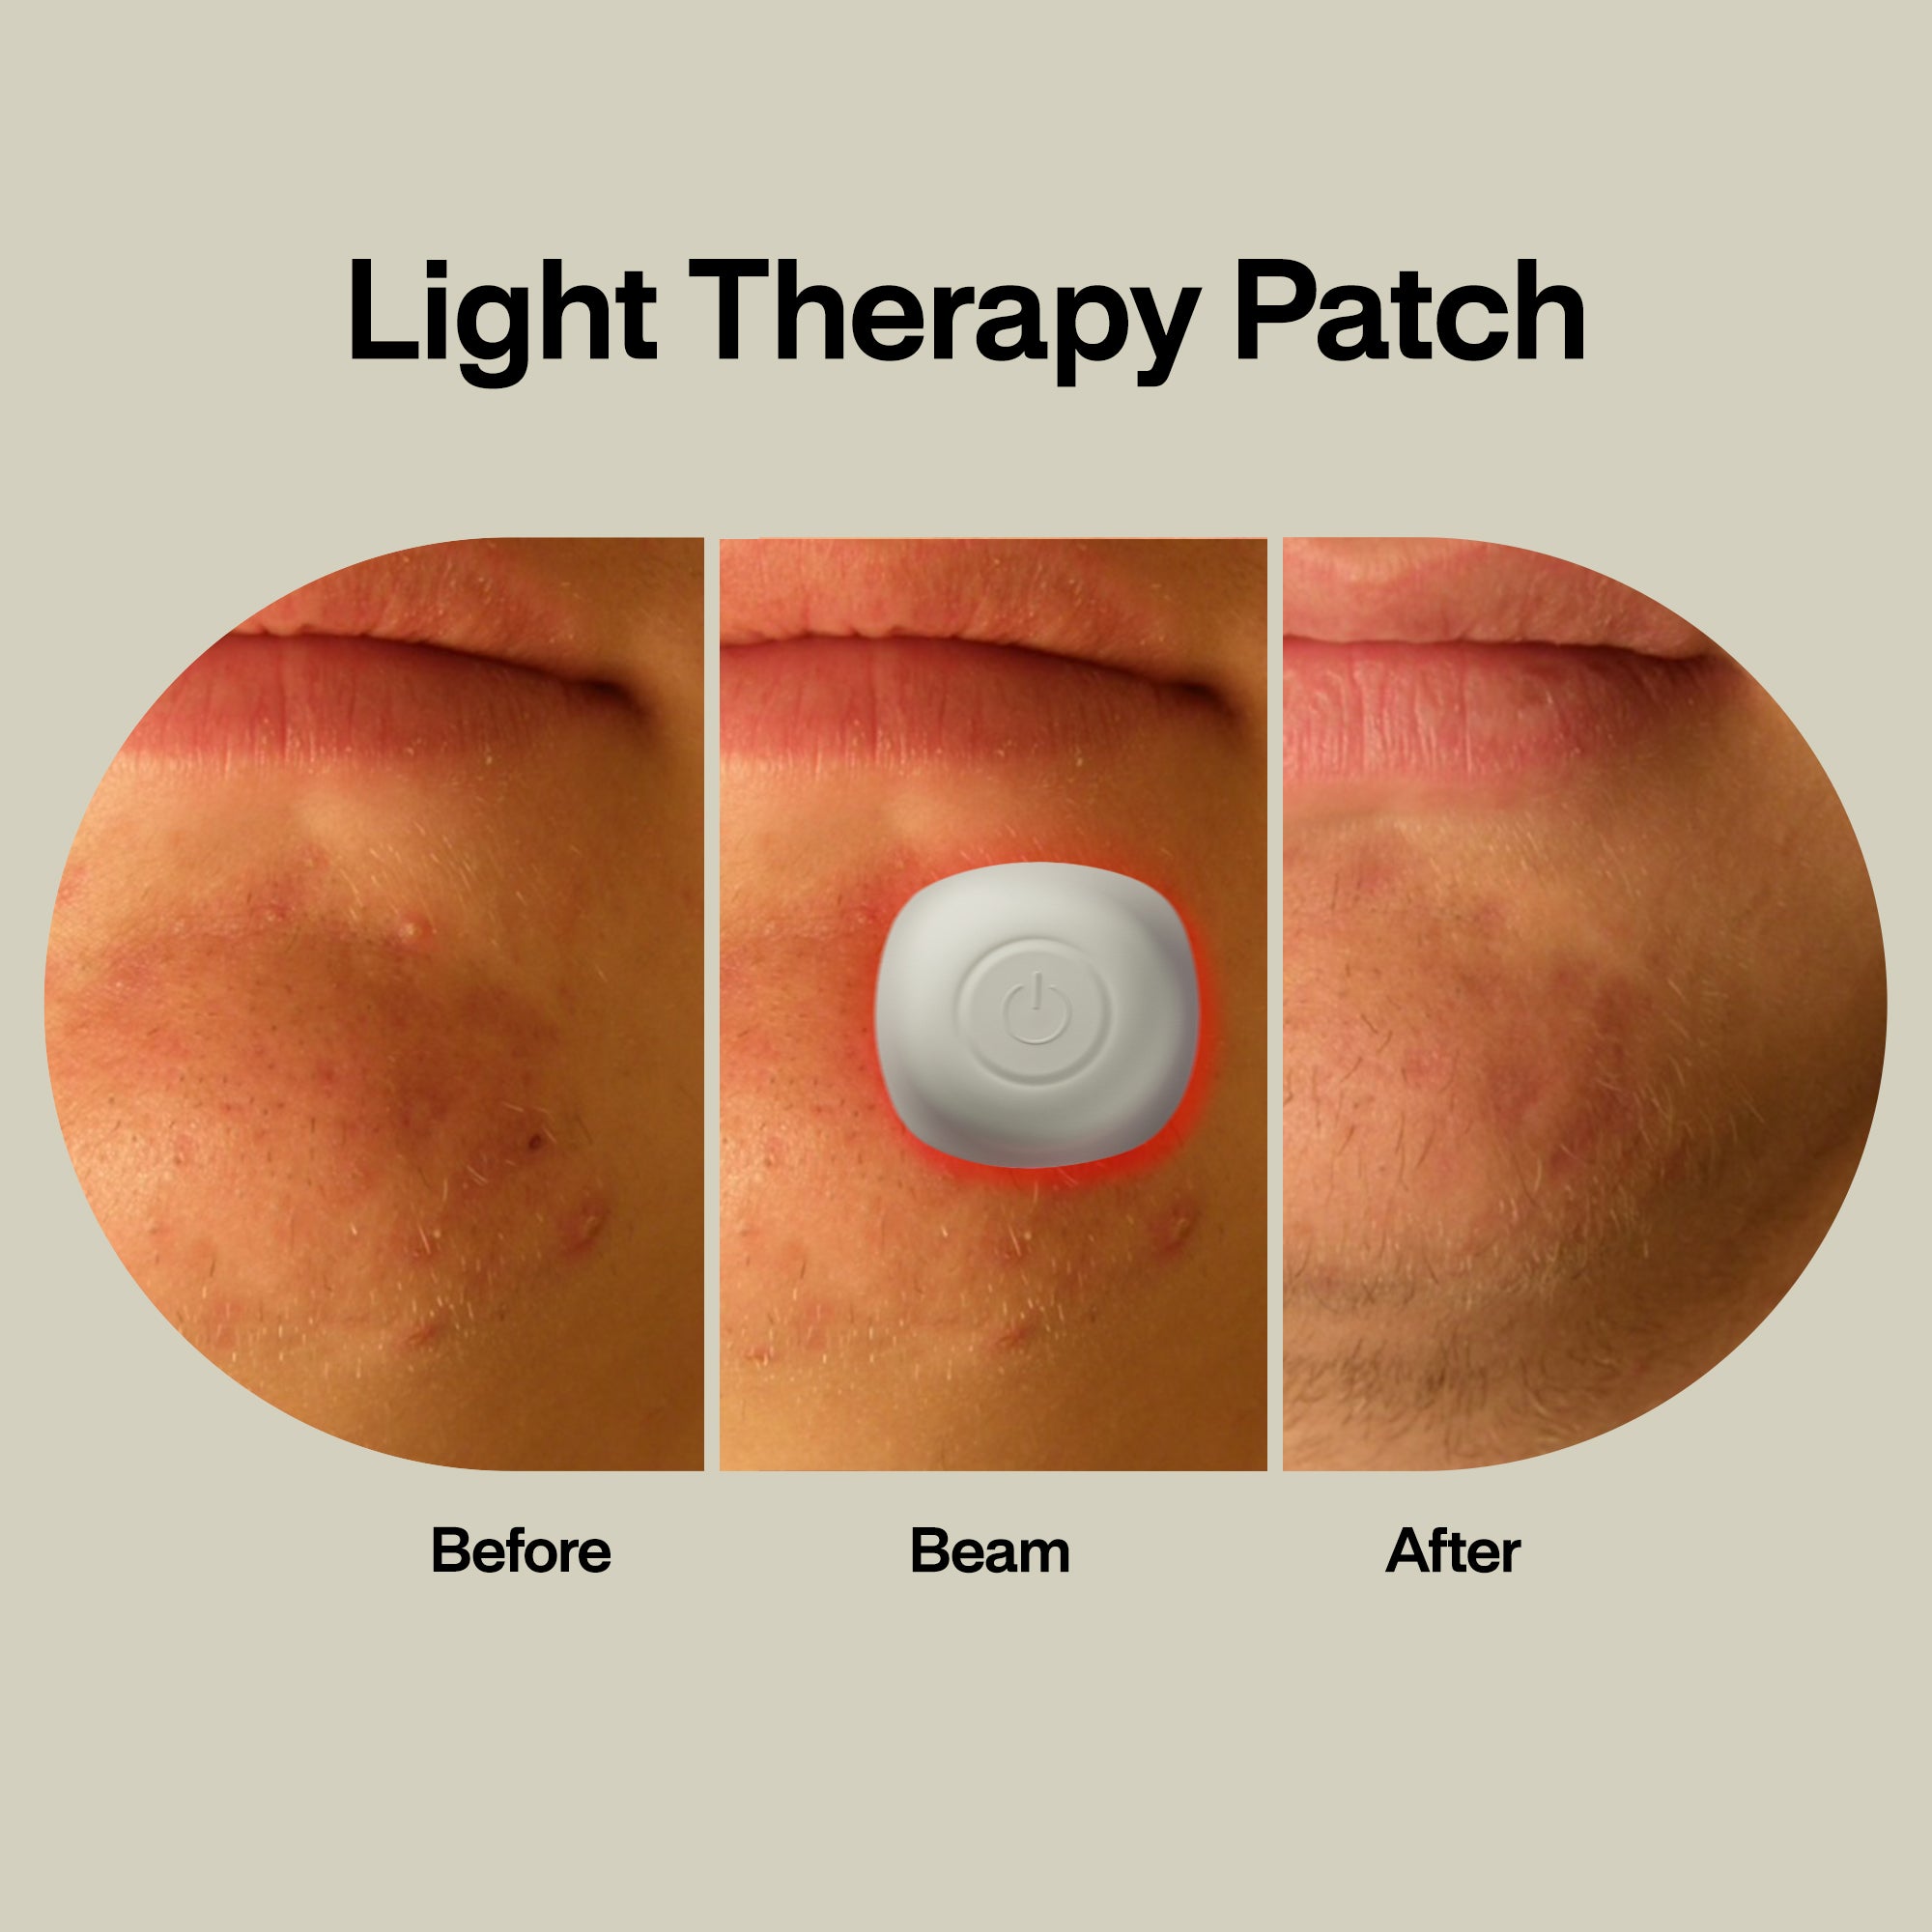 Acne Light Therapy Patch (1-Pack)